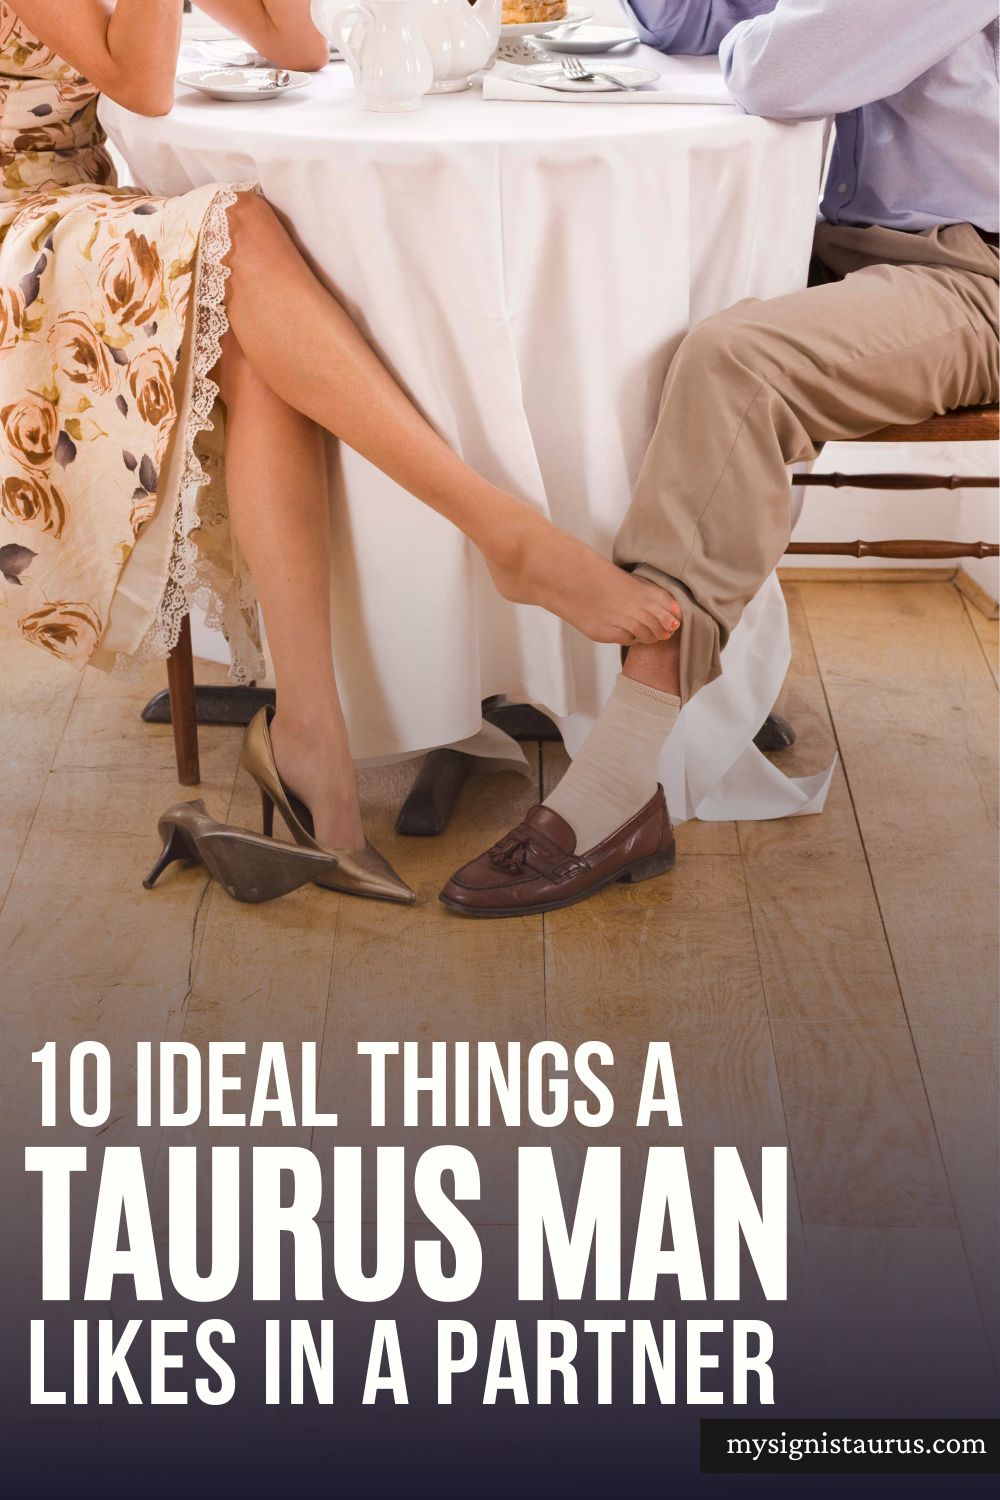 10 Ideal Things A Taurus Man Likes In A Partner Or Relationship